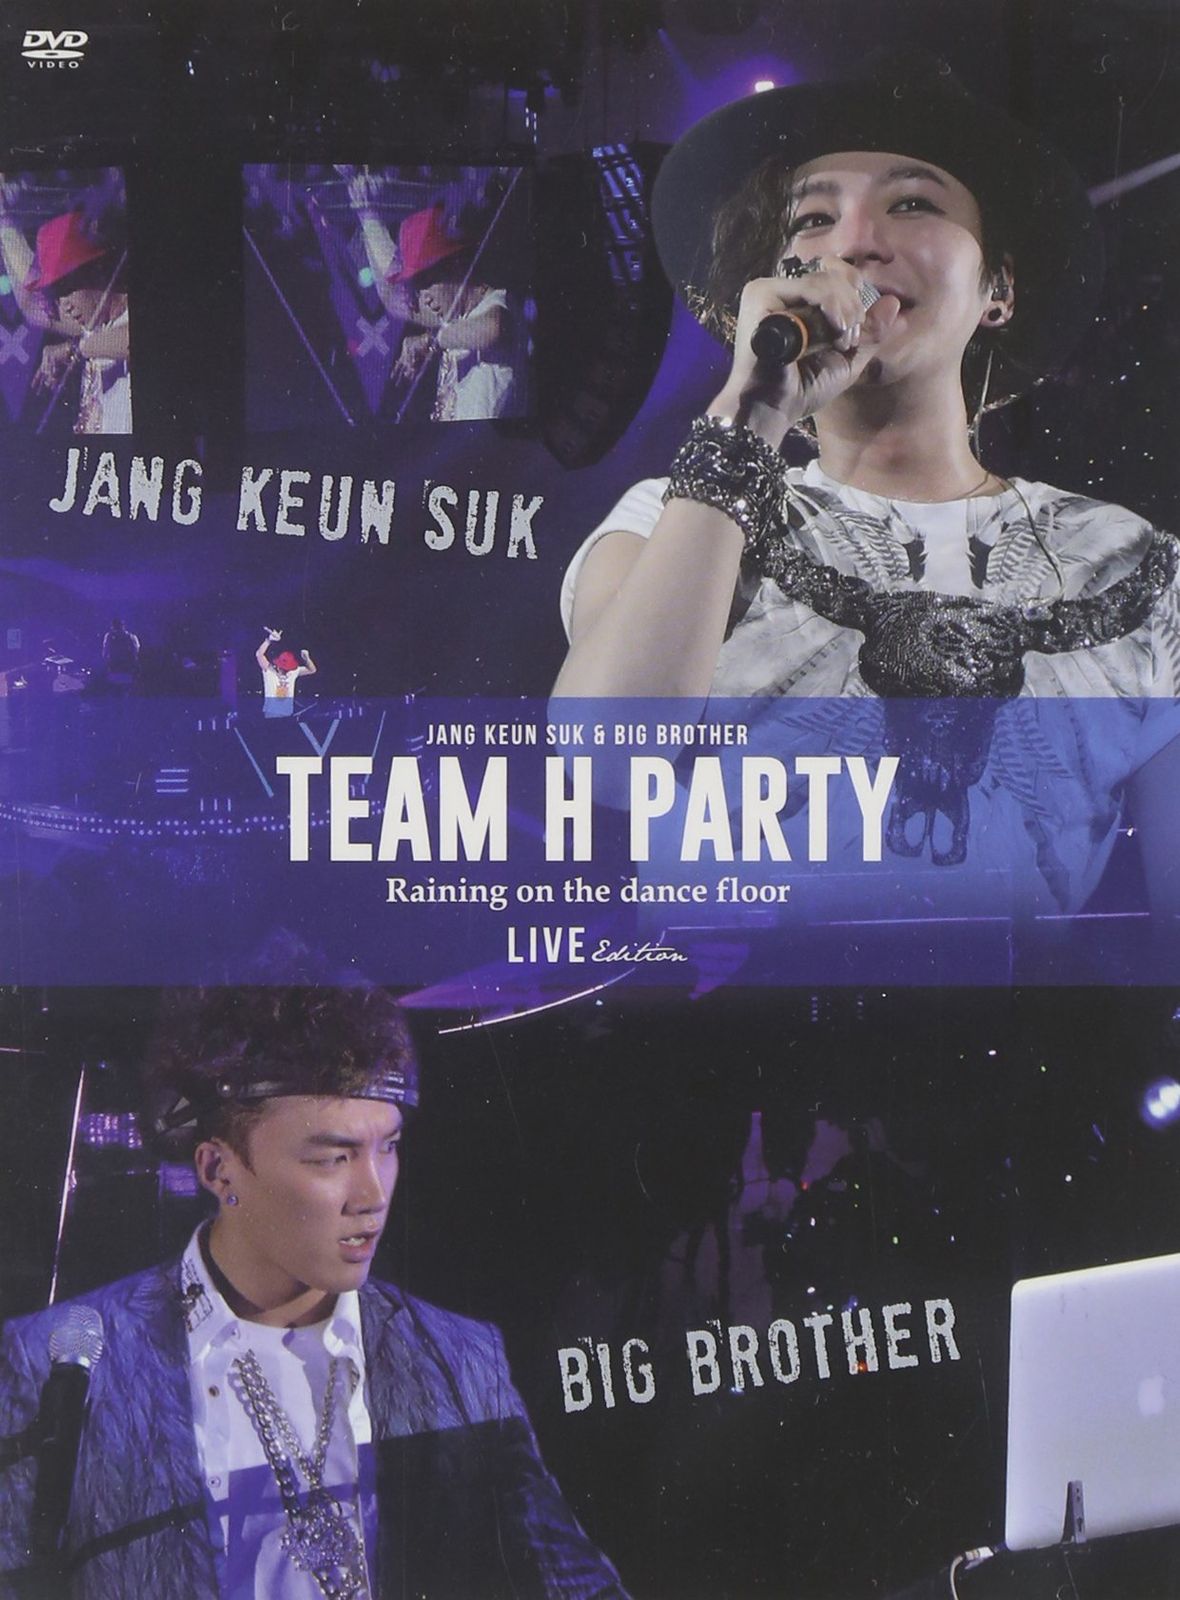 TEAM H PARTY TOUR DVD -LIVE EDITION- - メルカリ